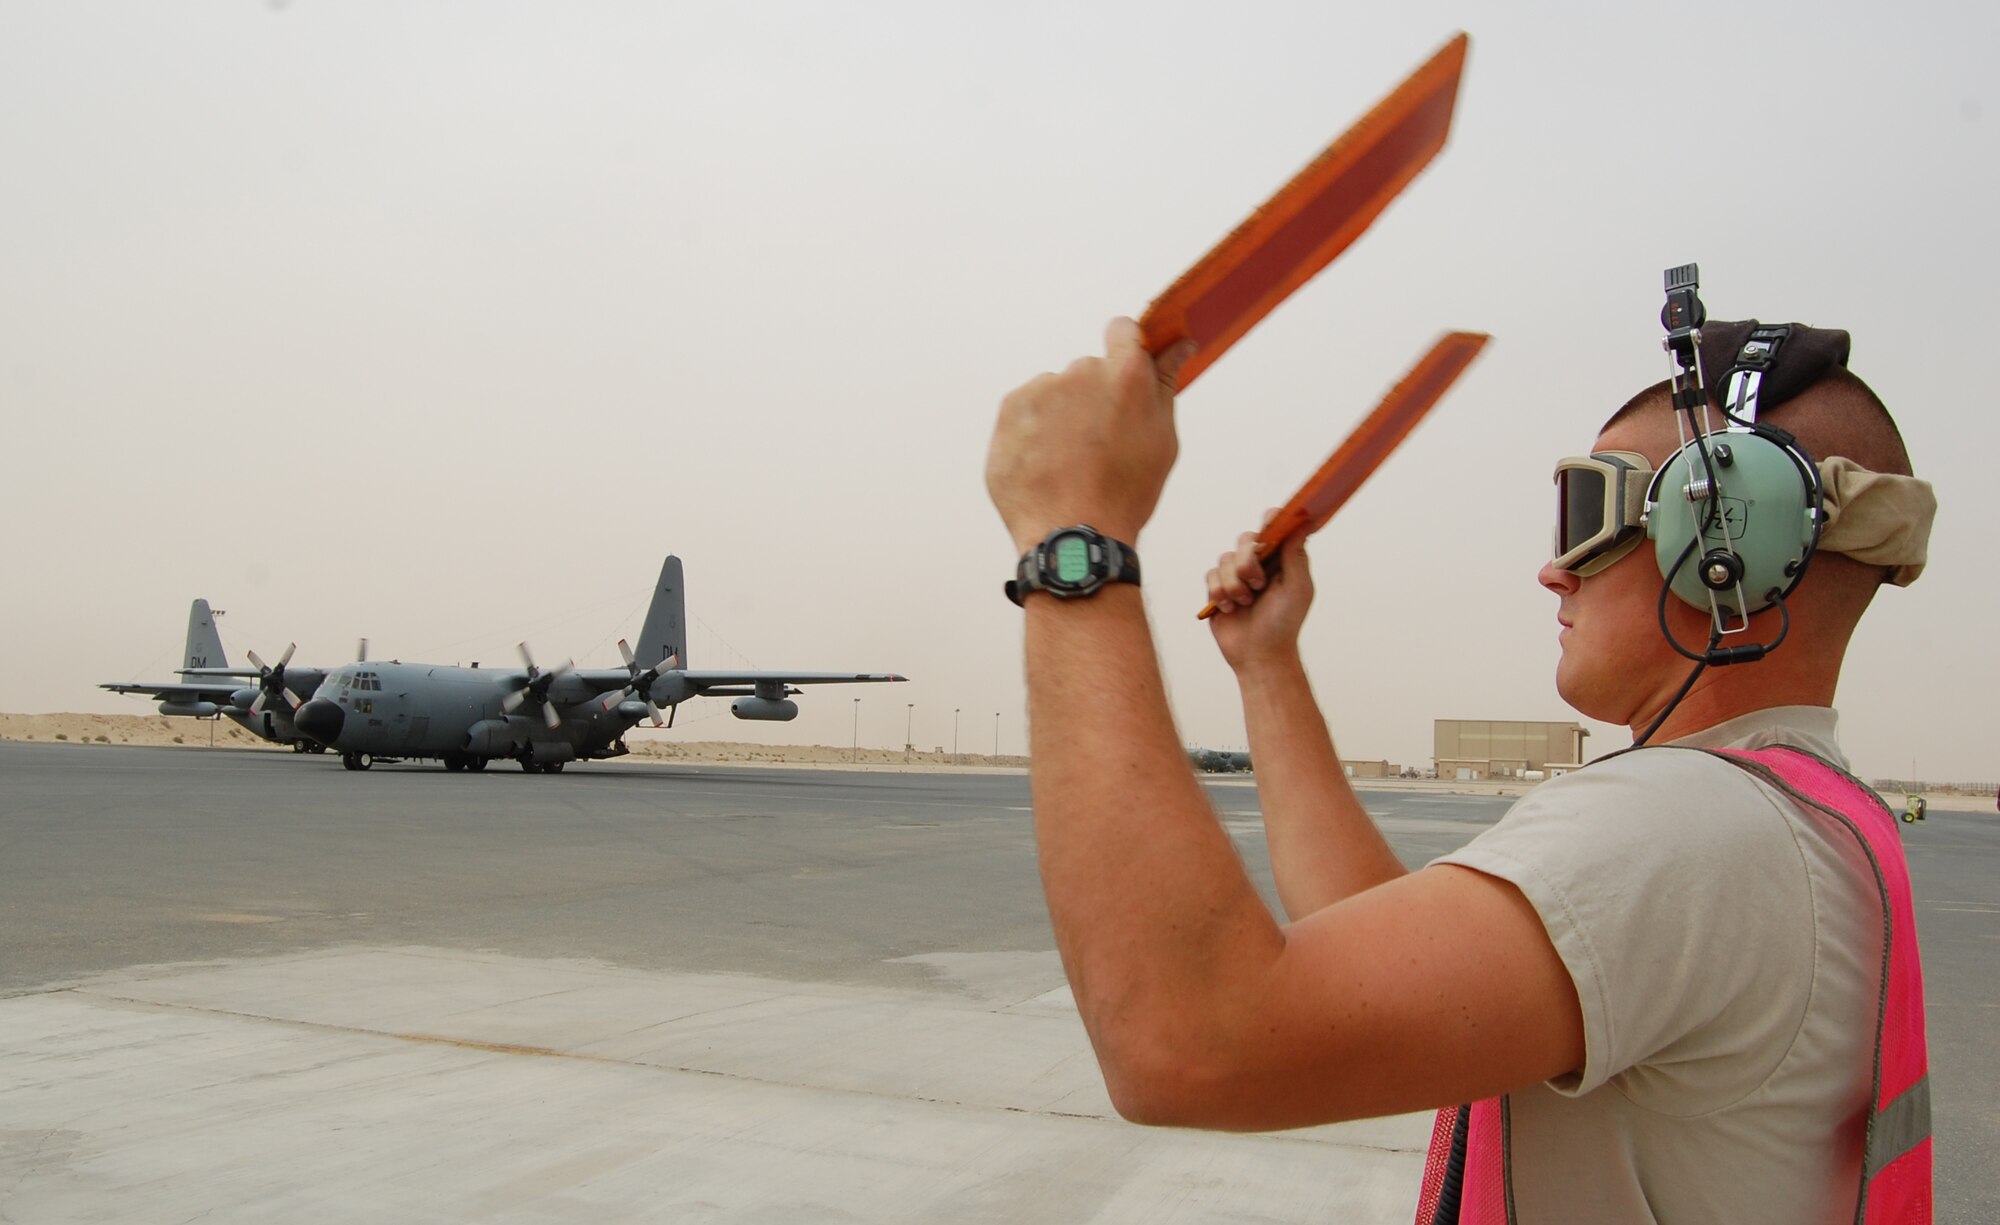 SOUTHWEST ASIA -- Airman Cory Francis, a C-130 crewchief deployed with the 386th Expeditionary Aircraft Maintenance Squadron uses marshalling paddles to direct aircraft commander Capt. Tony Stibral and co-pilot 1st Lt. Corey Hogue returning from a mission March 18, 2008, to their parking spot on the ramp of an air base in the Persian Gulf Region. The pilots and seven other crewmembers from the 43rd Expeditionary Electronic Combat Squadron on board completed the unit’s 2,276th combat sortie capping the Arizona-based unit’s fourth consecutive year deployed supporting the Global War on Terror. Airman Francis is deployed from the 755th AMXS, and the aircrew members from the 55th Electronic Combat Group out of Davis-Monthan Air Force Base. (Air Force photo/Tech. Sgt. Michael O’Connor)